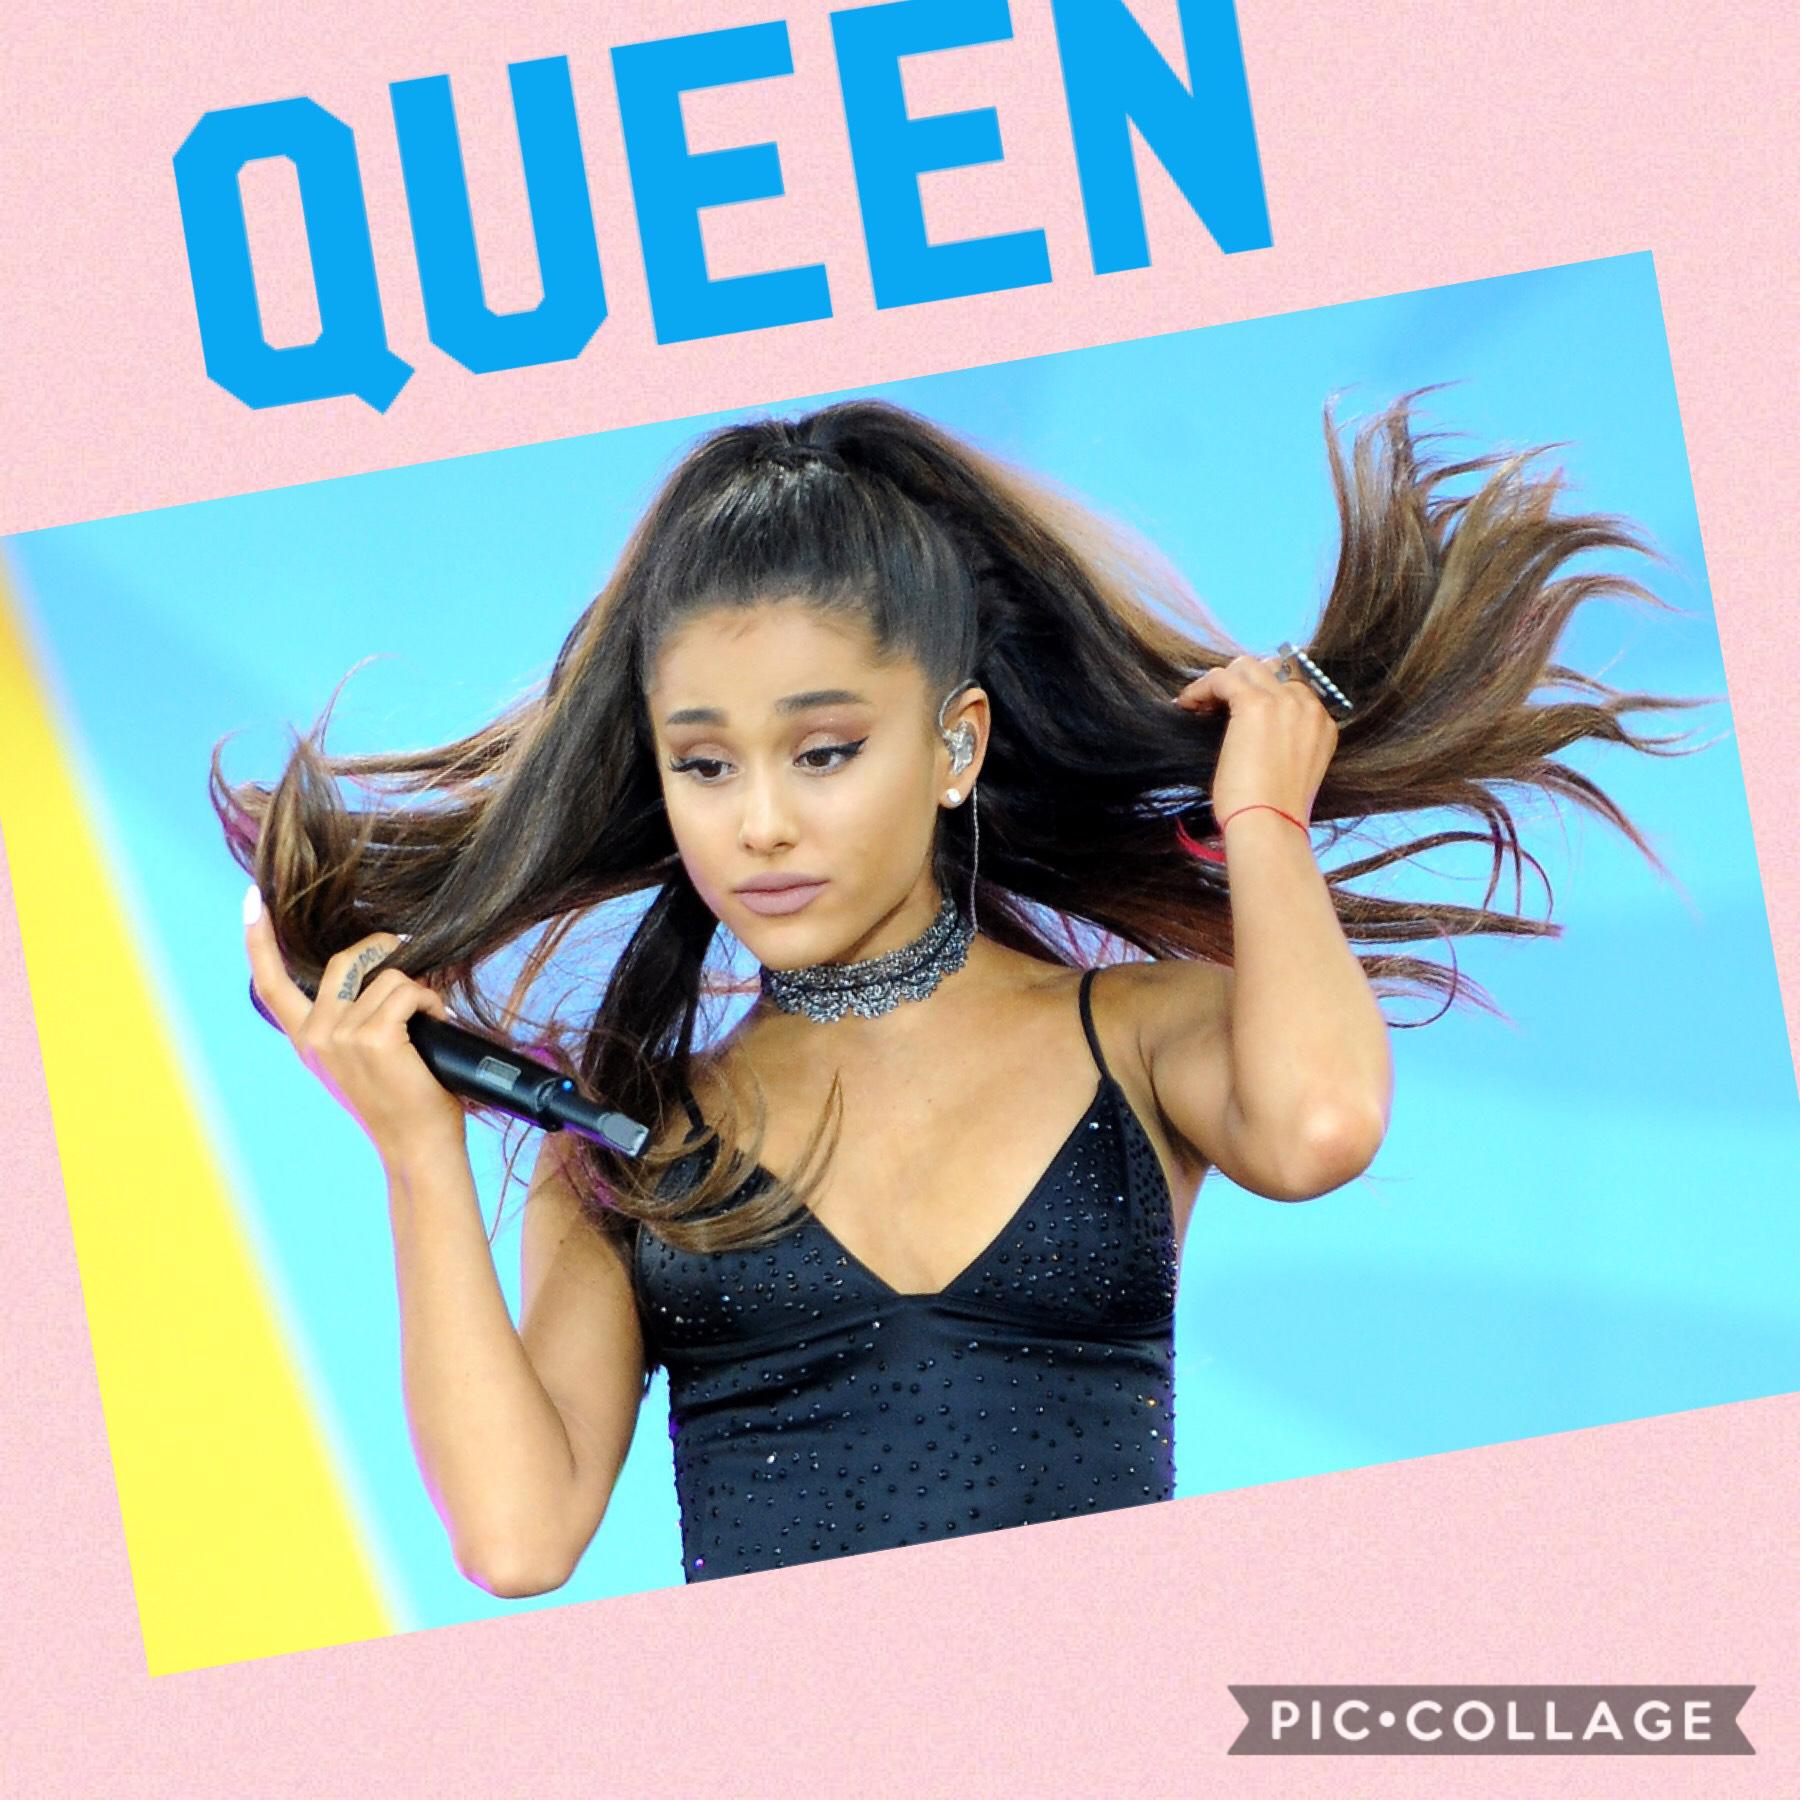 My queen!👑
Sorry I haven't been active but I promise I will be from now on
